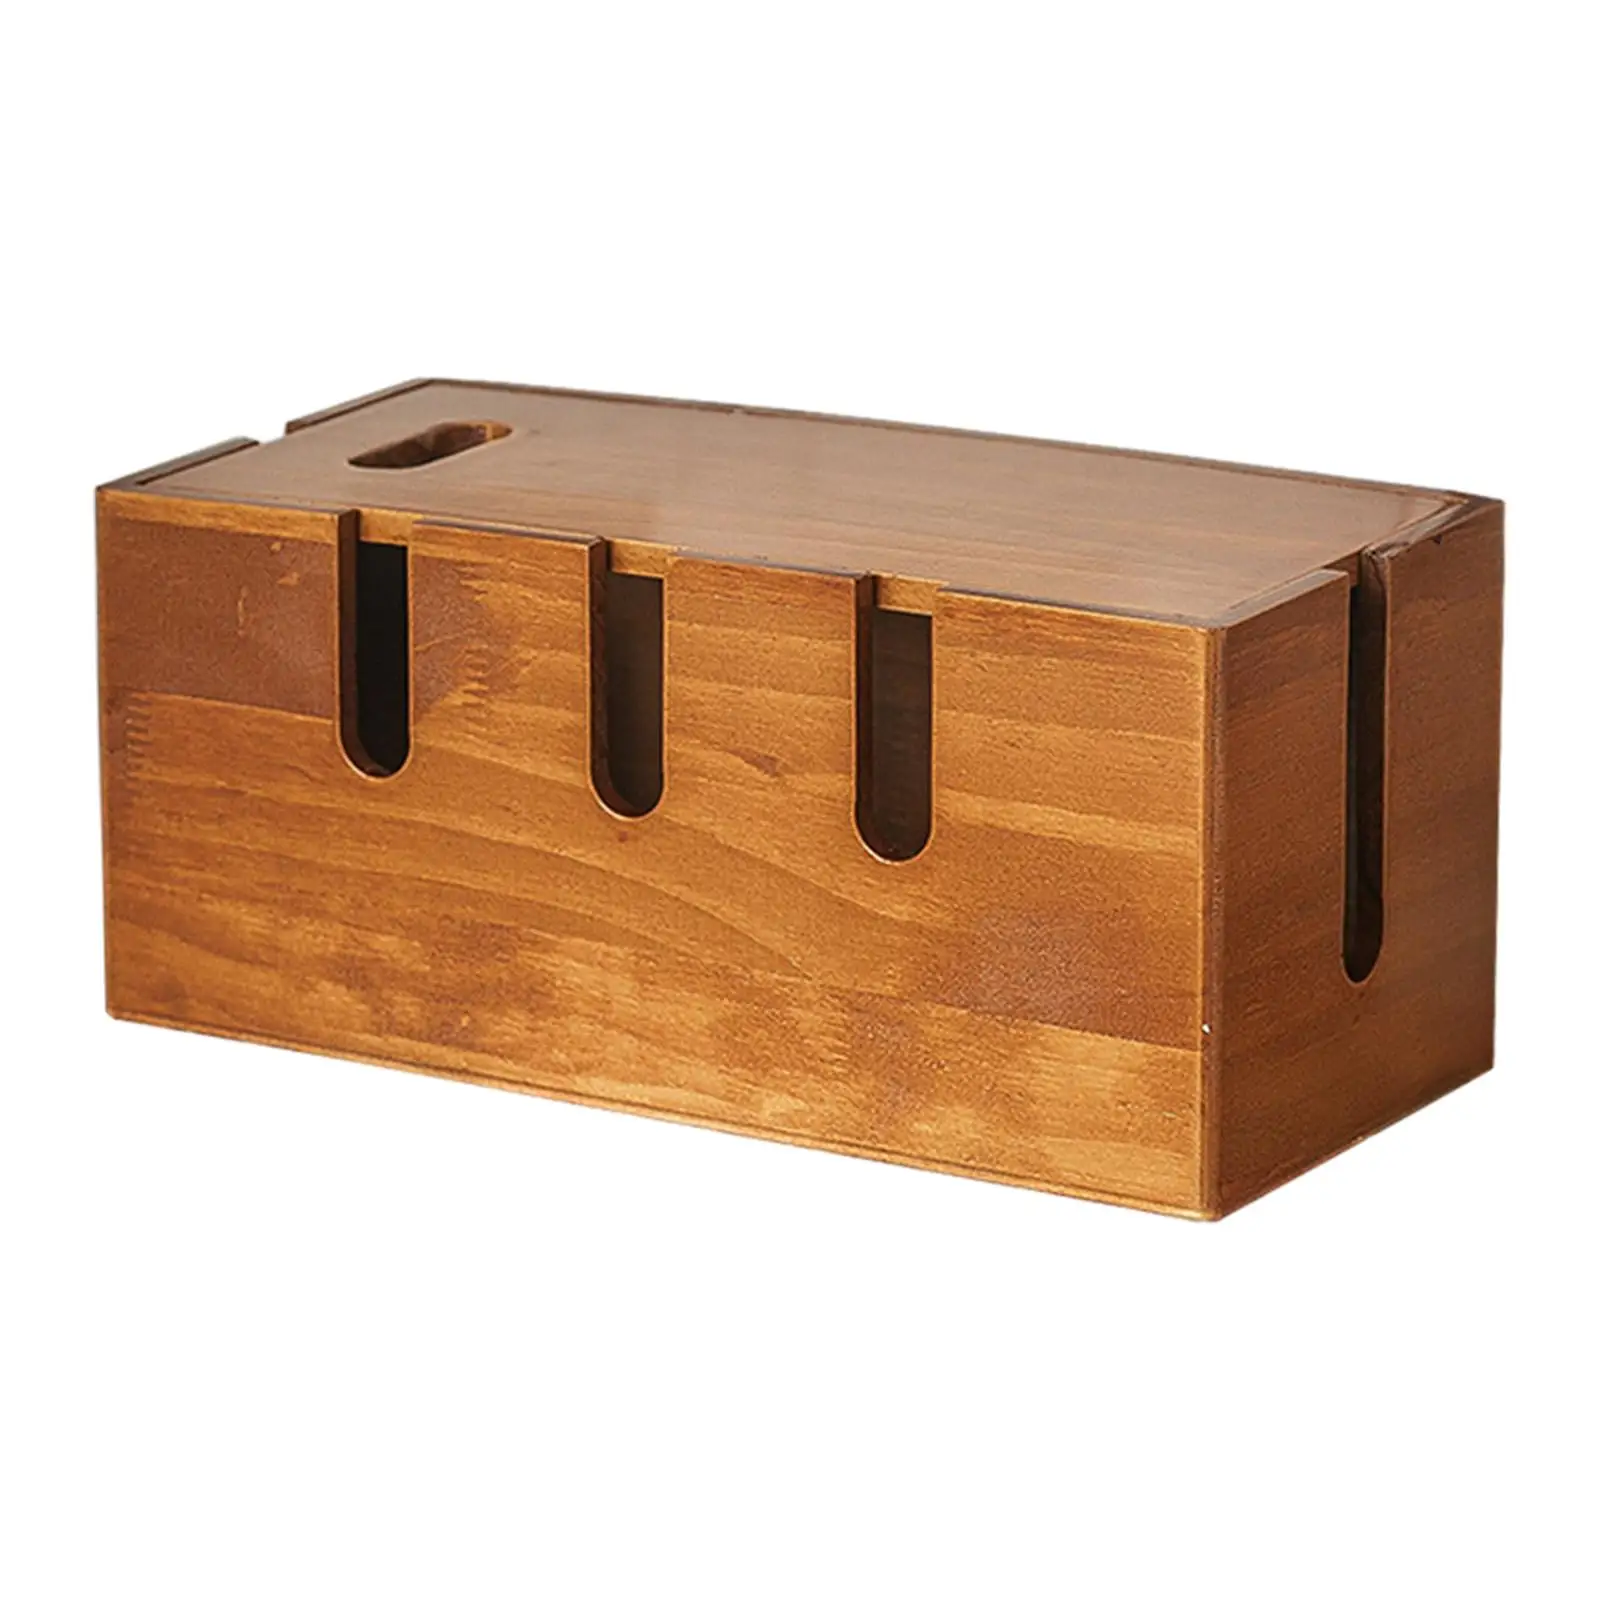 Power Cord Box Wood Cord Organizer for Desk for USB Hub Computer Home Office